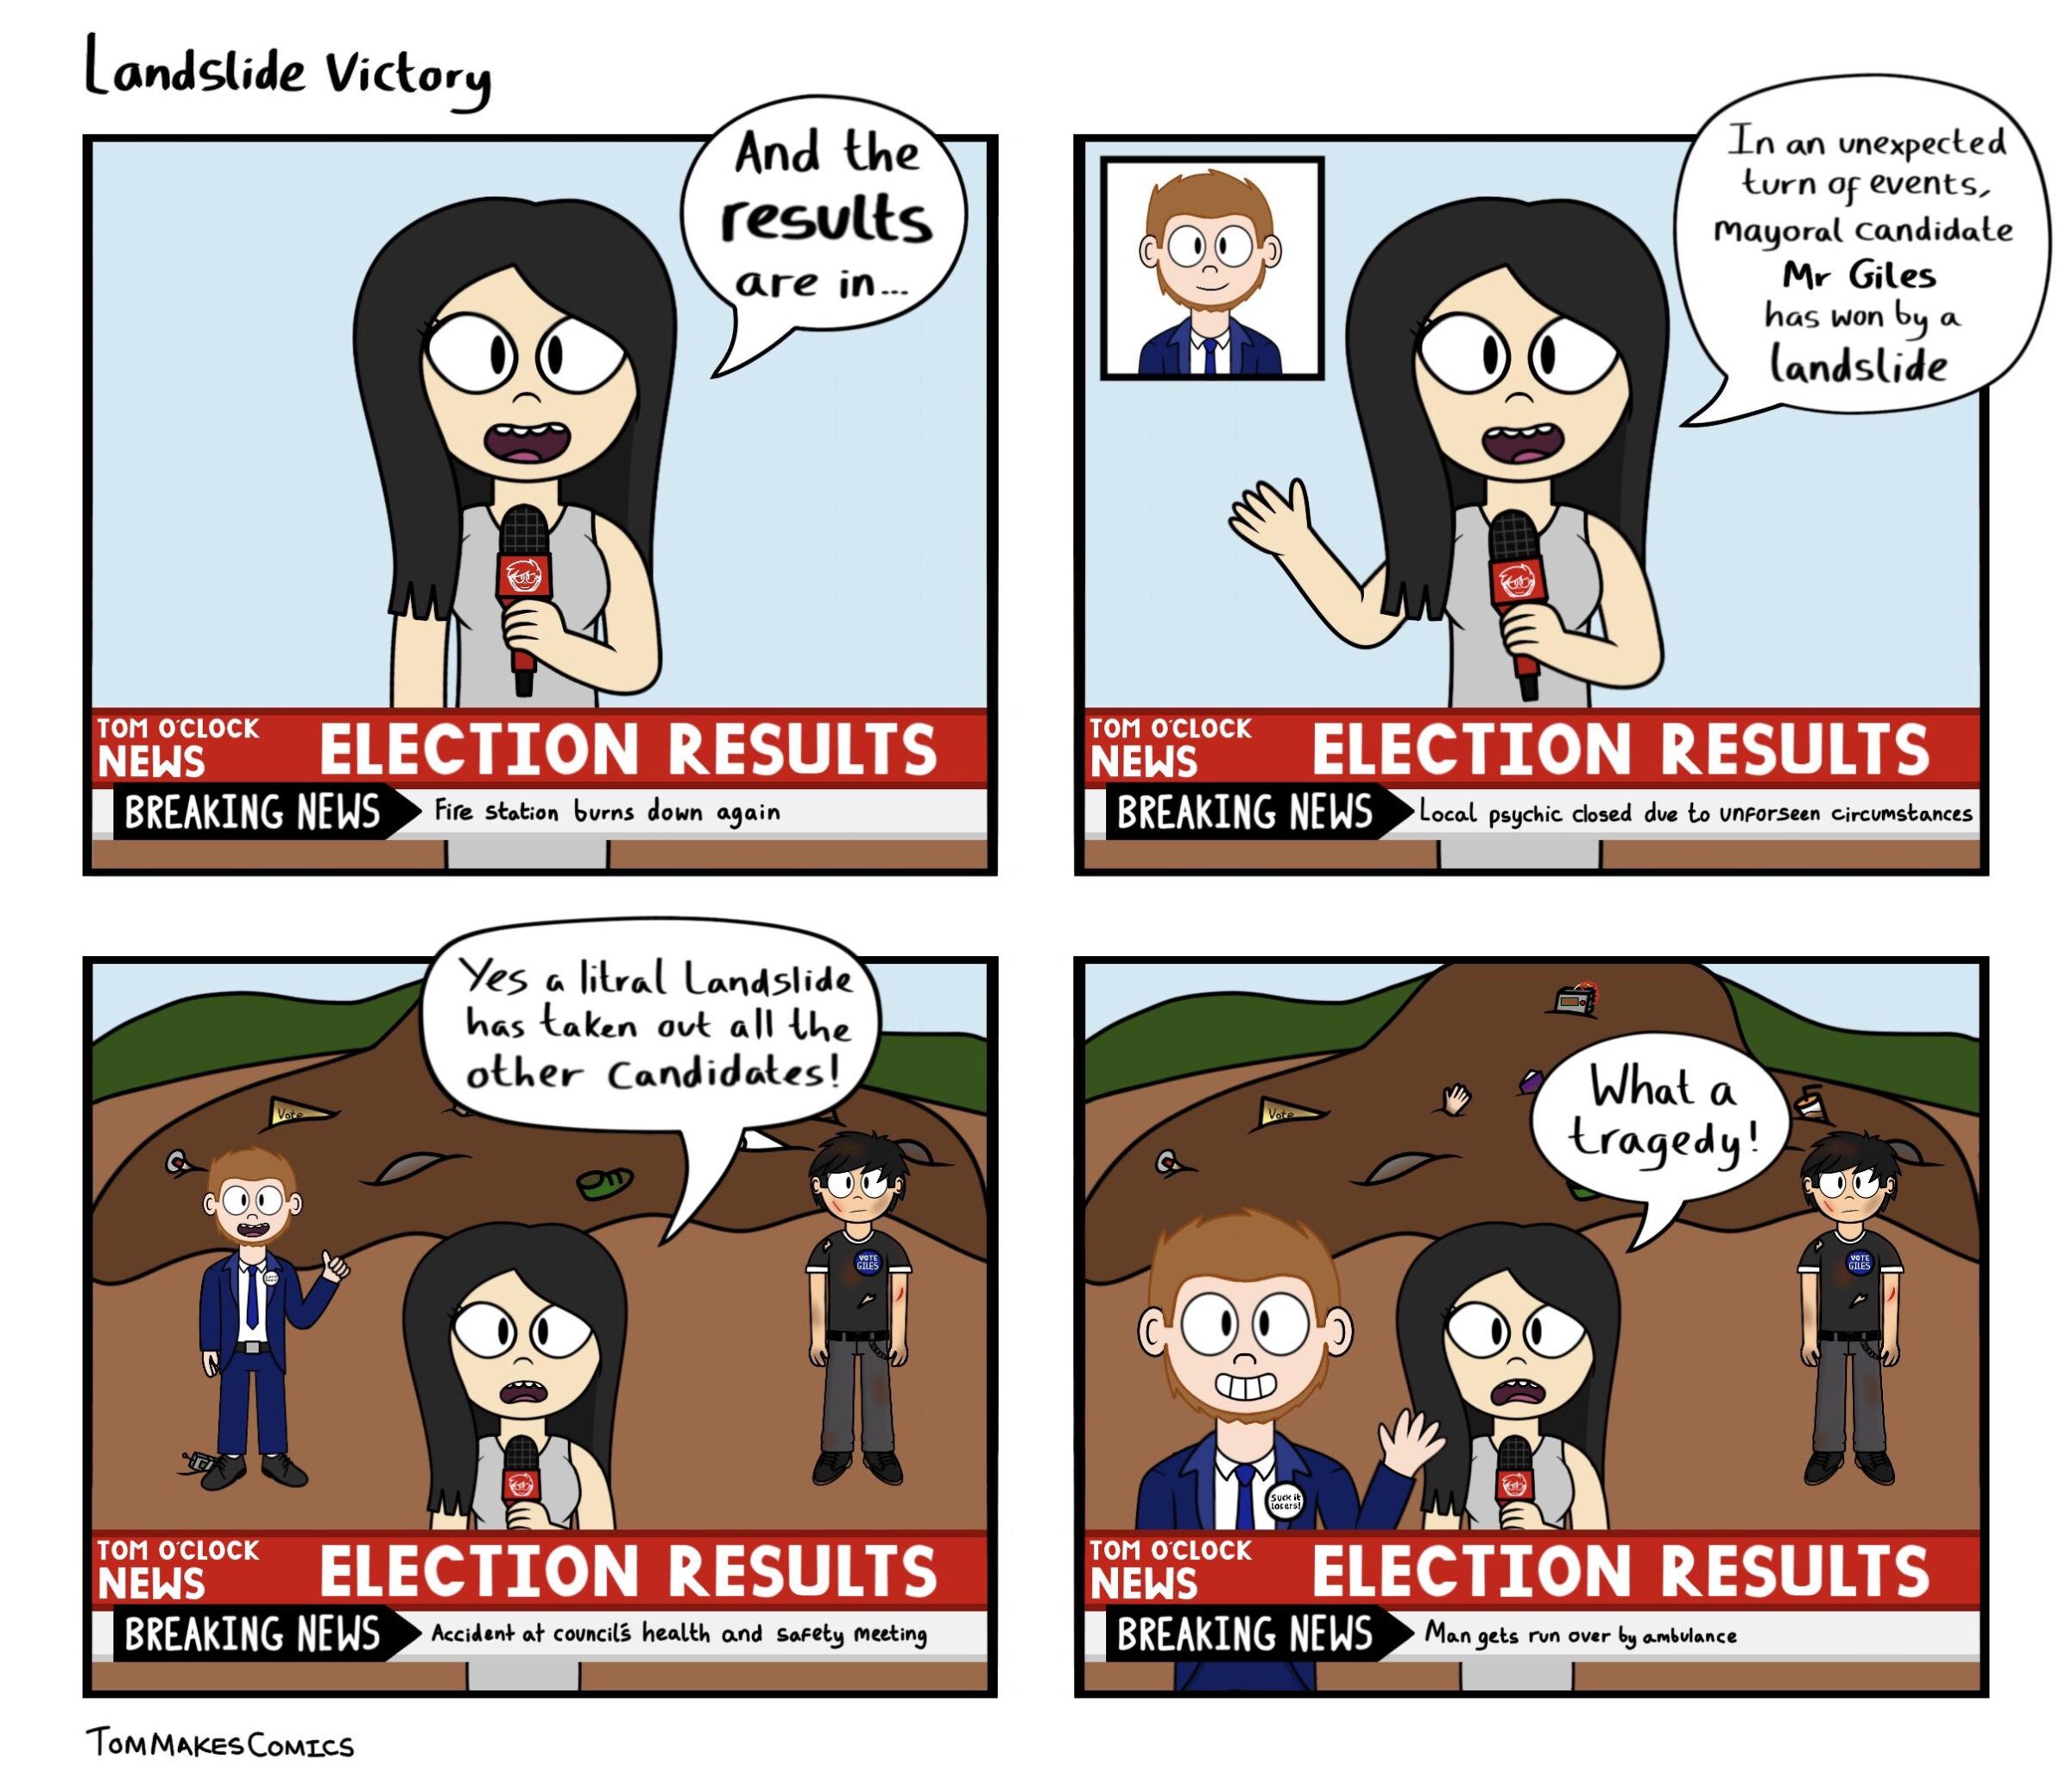 Landslide victory - tommakescomics, TomMakesComics, Landslide Victory Comics Landslide victory - tommakescomics, TomMakesComics, Landslide Victory text: Landslide Victory And the results are in rom OCLOCK ELECTION RESULTS NEWS— BREAKING NEWS Fife Station burns down again Unnd51idQ taken ove all otker Candidates! oo VOTE SOM OCLOCK s—ELECTION RESULTS NEW BREAKING NEWS Accideré council; health and saFeEy meeting TOM COMLCS Ono In an unexpected turn Of events, mayoral CQndidaLe Giles has won (ands(ide rom OCLOCK ELECTION RESULTS NEWS— BREAKING NEWS Locd psychic closed due 1.0 unporseen circumshnces What a {Moyedy ! VOTE GILES oo Suck it Losers! SOM OCLOCK s—ELECTION RESULTS NEW BREAKING NEWS run over æmbvlance 